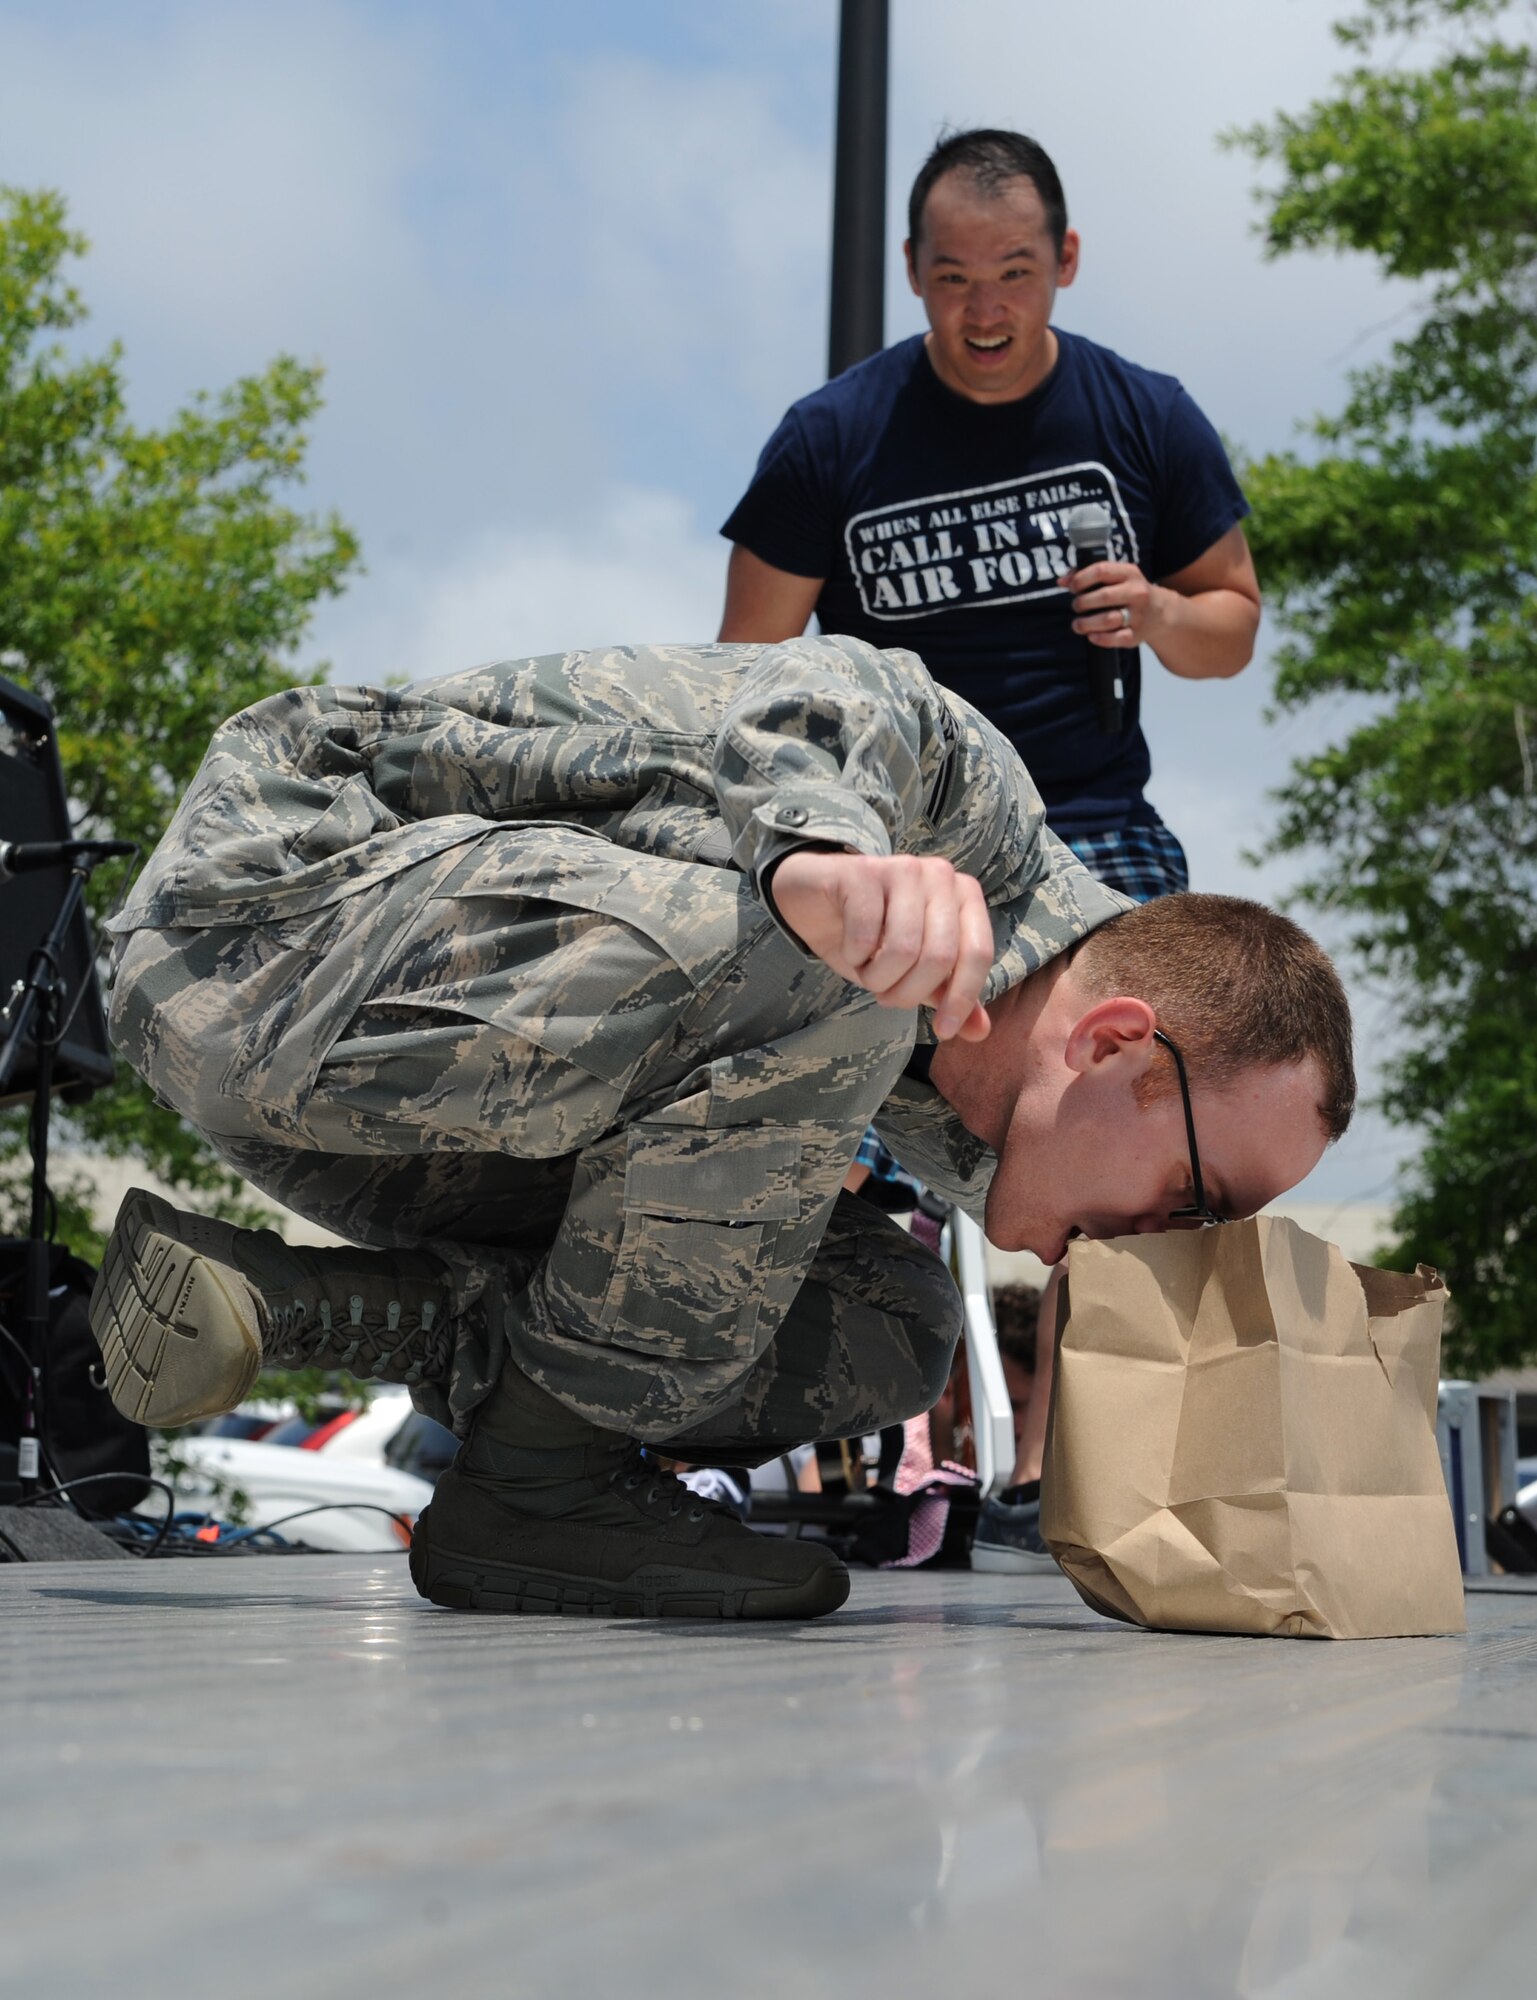 Staff Sgt. Christopher Pineda, 81st Training Support Squadron interactive media developer, competes in the dragon balance competition during a burger burn April 29, 2016, Keesler Air Force Base, Miss. The burger burn was the final event of Wingman Week in support of Comprehensive Airman Fitness. (U.S. Air Force photo by Kemberly Groue)